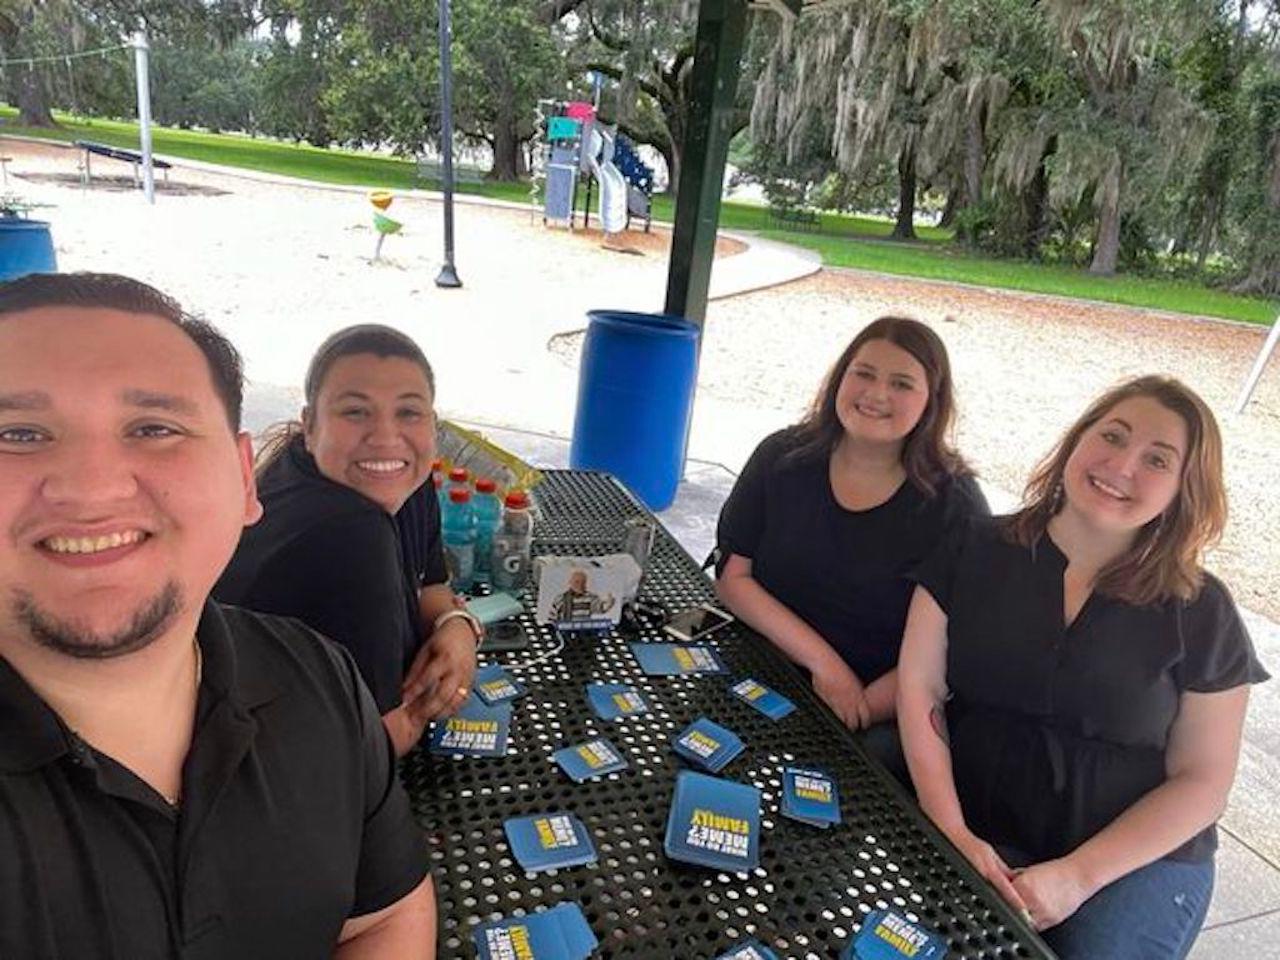 Today, some of our  BMSF family enjoyed a picnic lunch at the park! What are some traditions you like to do with your family?